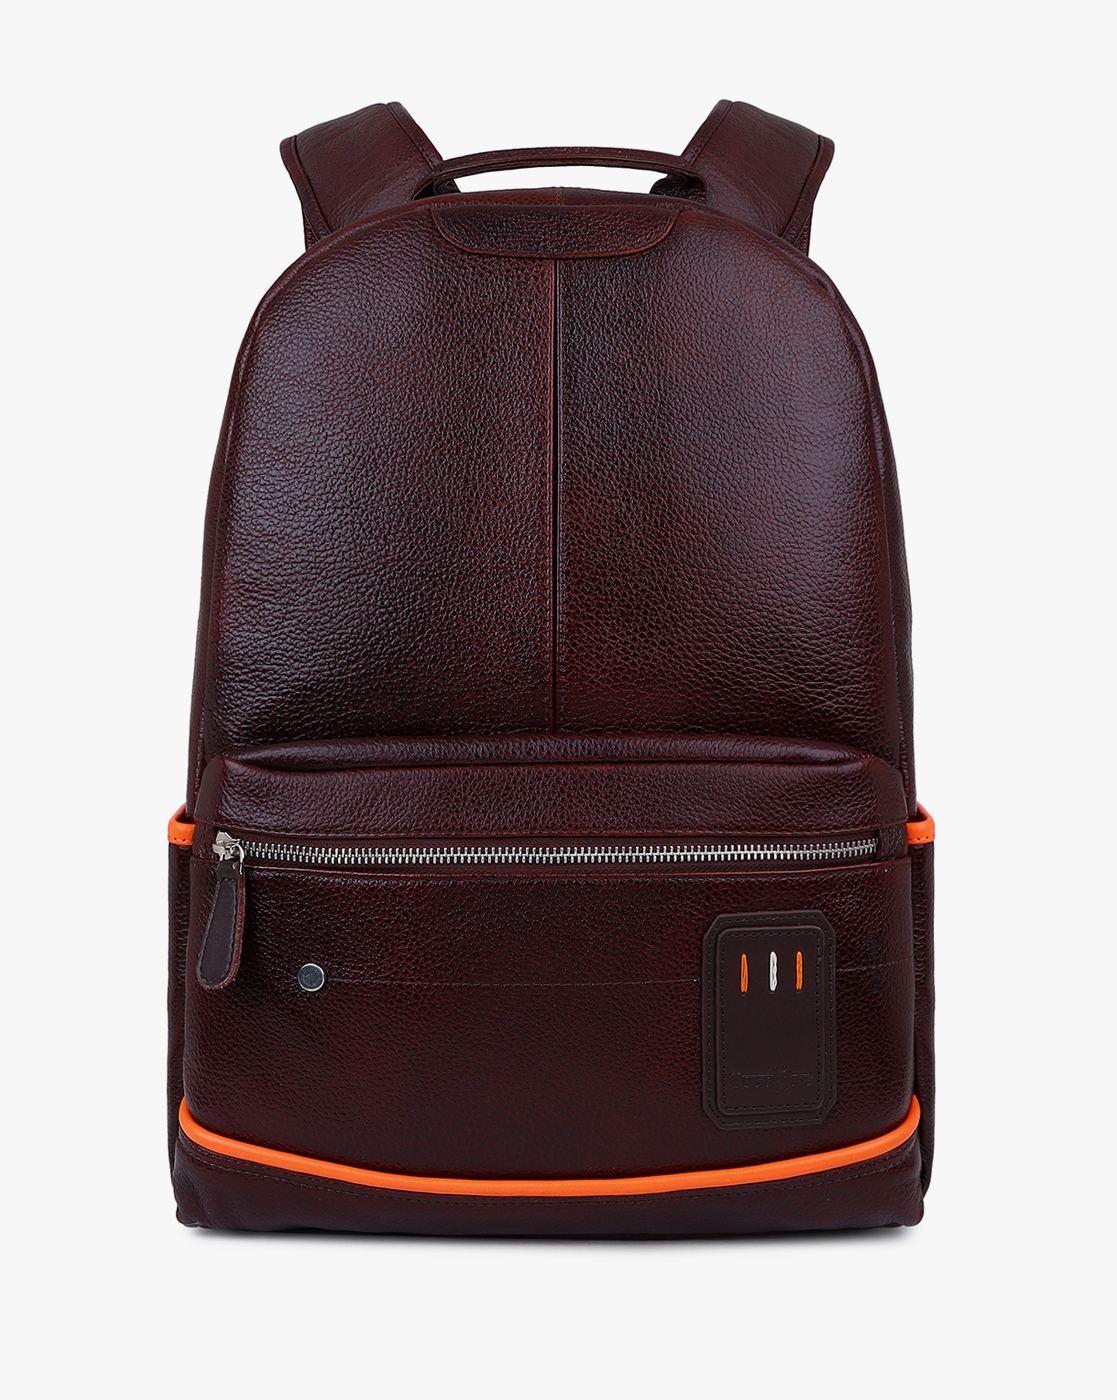 Buy SUEDE BACKPACK WOMEN in 4 Colors With Dark Brown Leather Top and Pocket  Fits 11 Laptop Online in India - Etsy